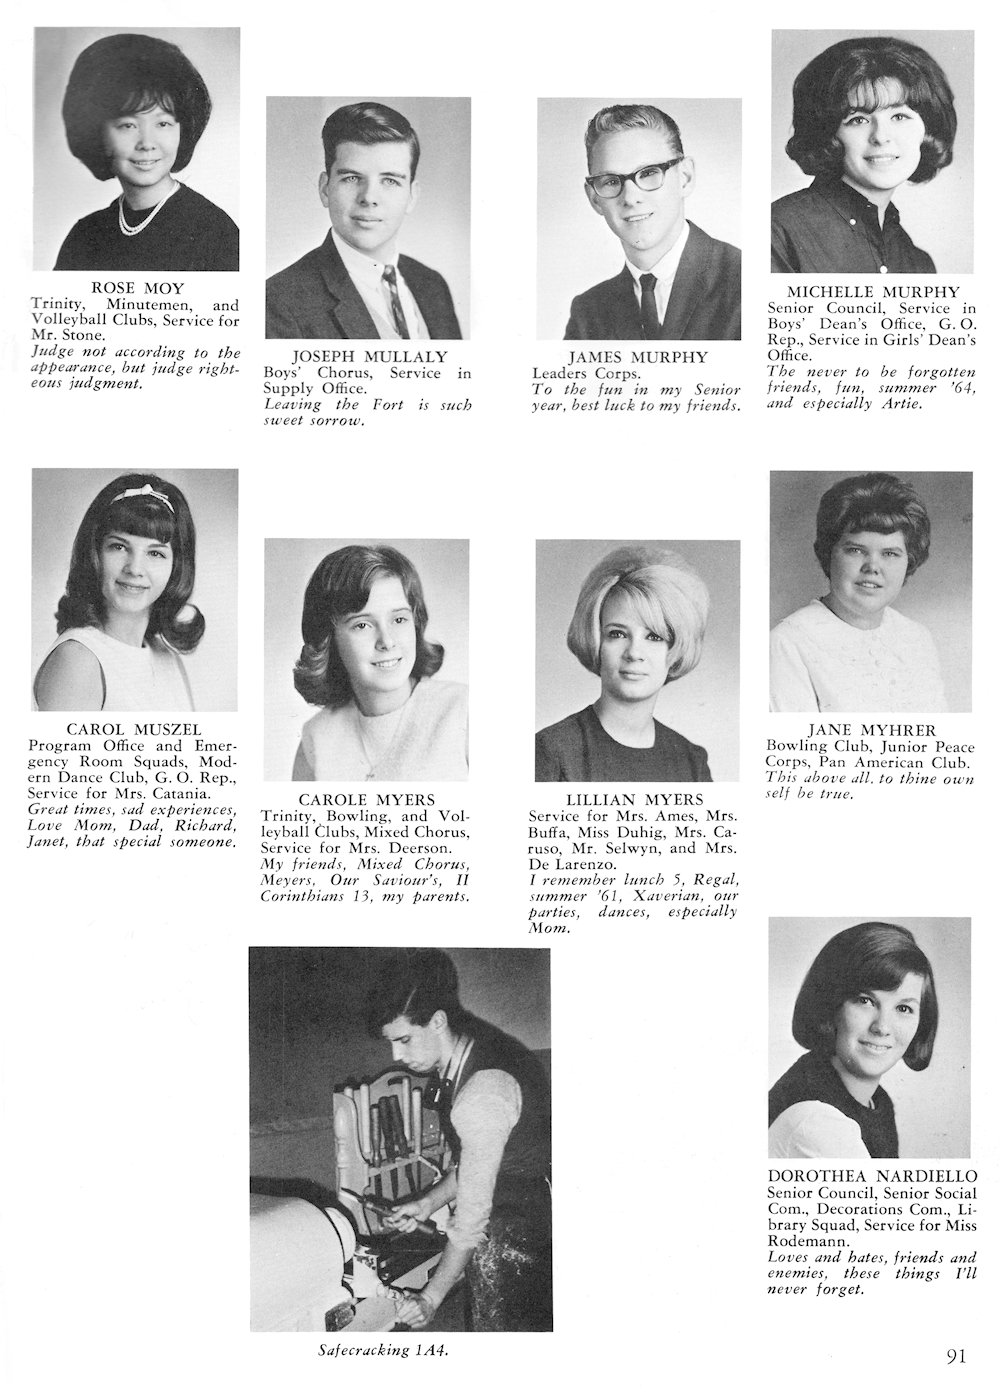 Moy-Nardiello page from Fort Hamilton High School 1965